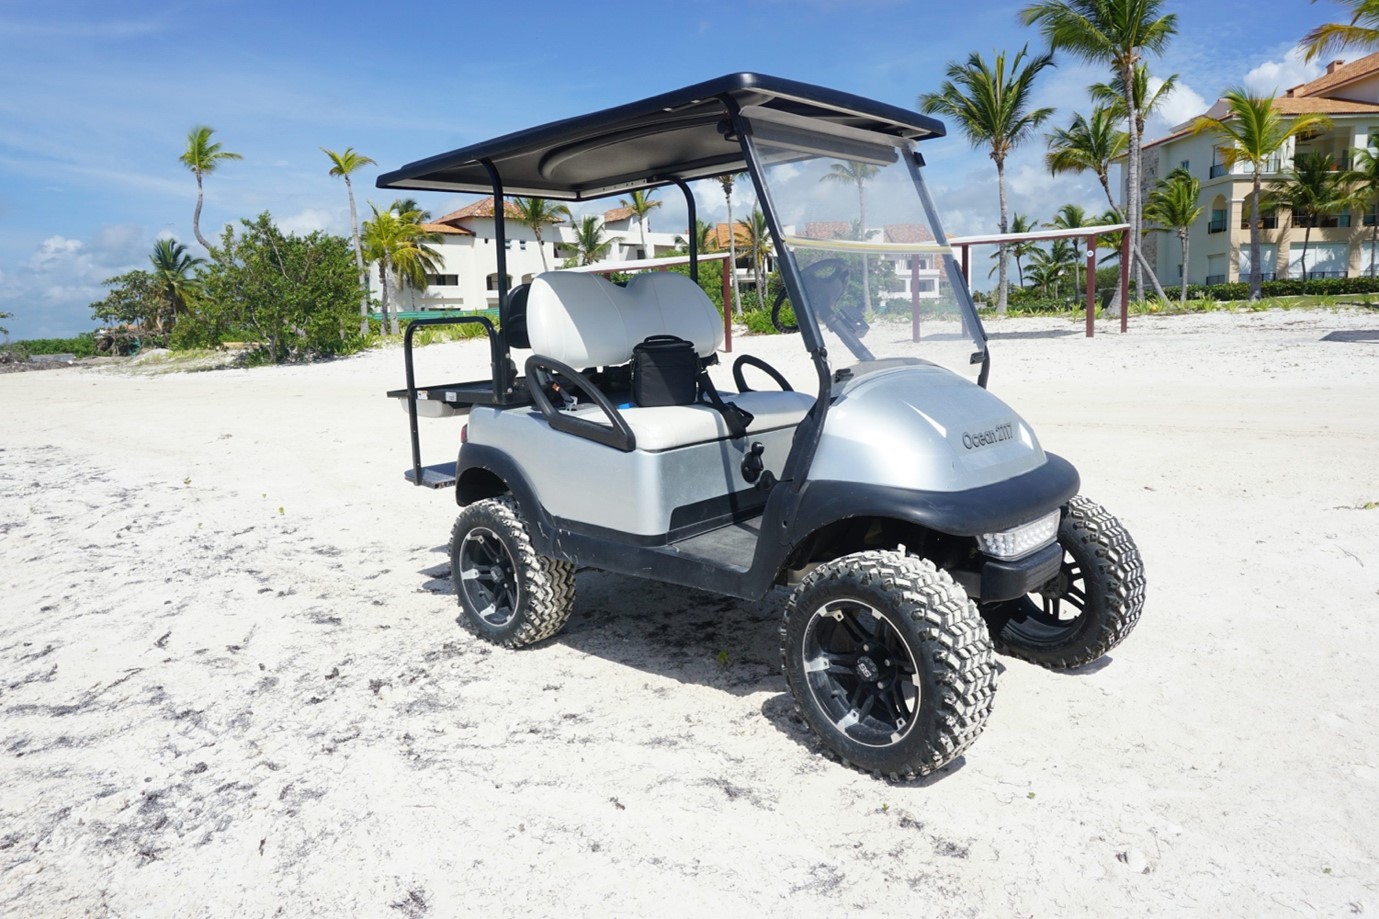 Common Applications of Golf Carts Beyond the Golf Course